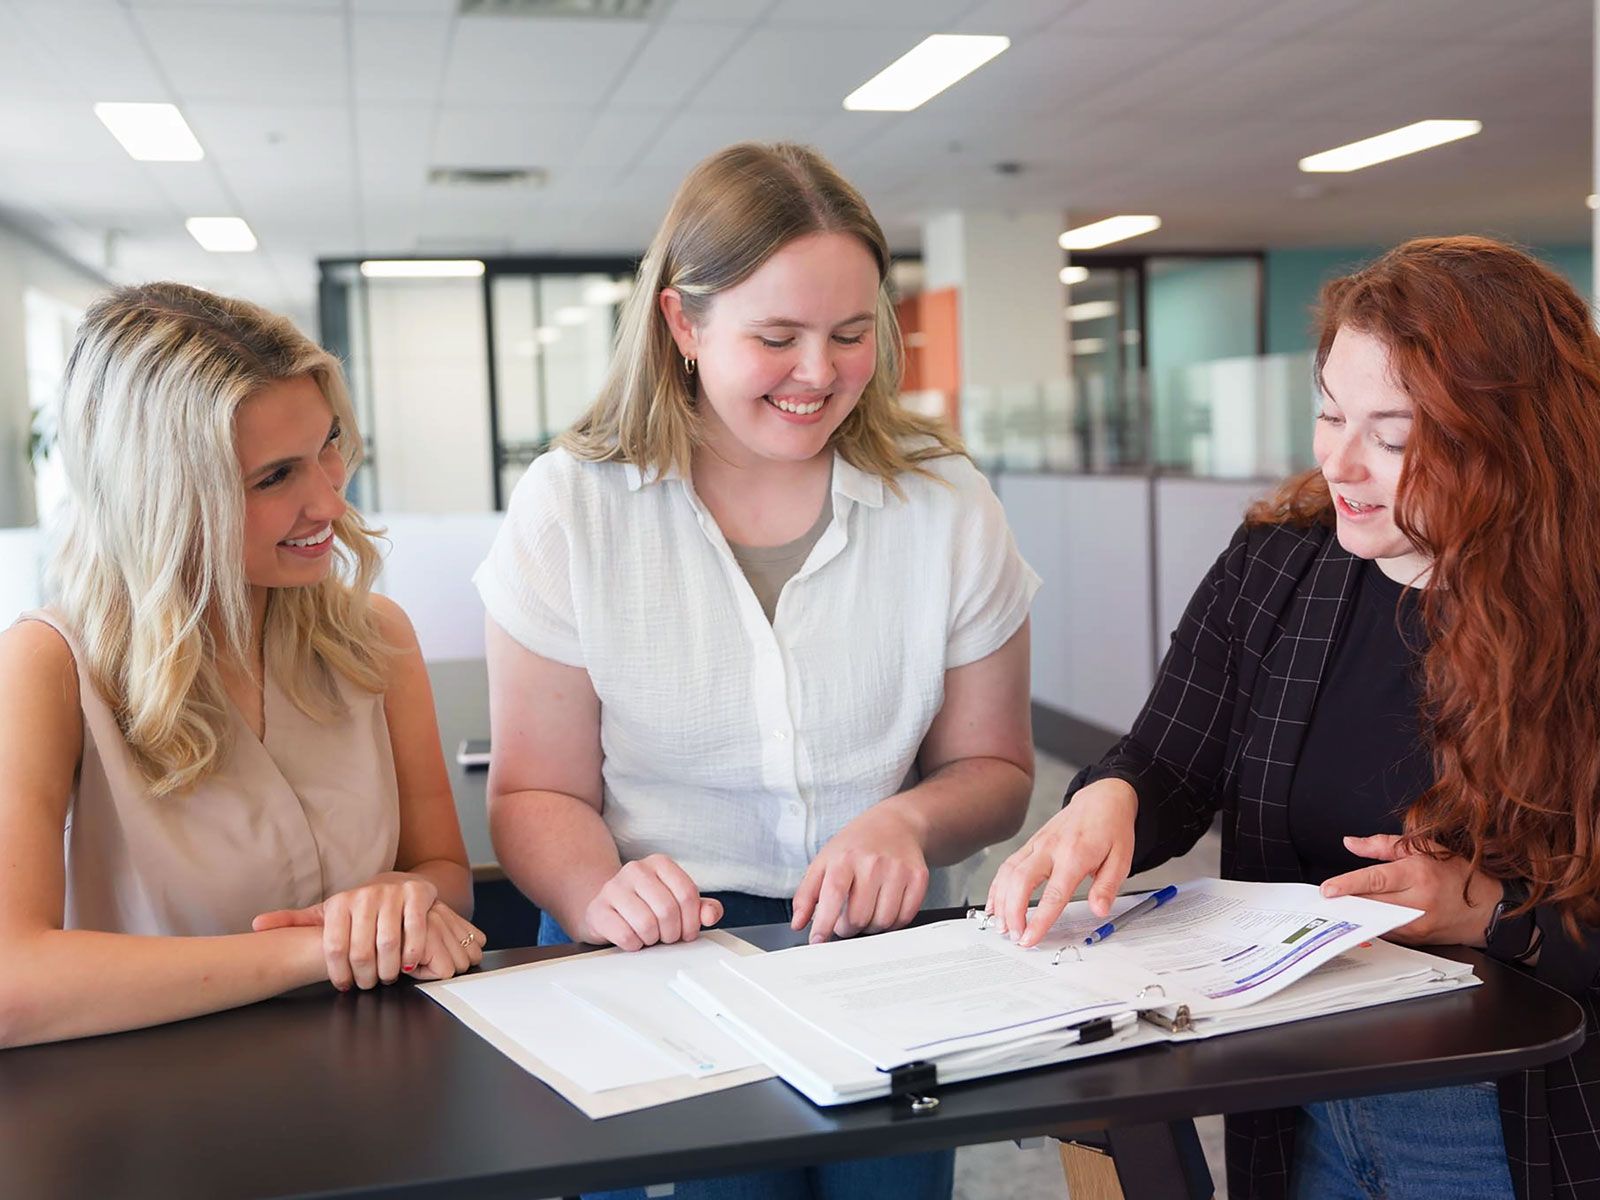 Three women smiling and collaborating over documents on a table in an office environment.